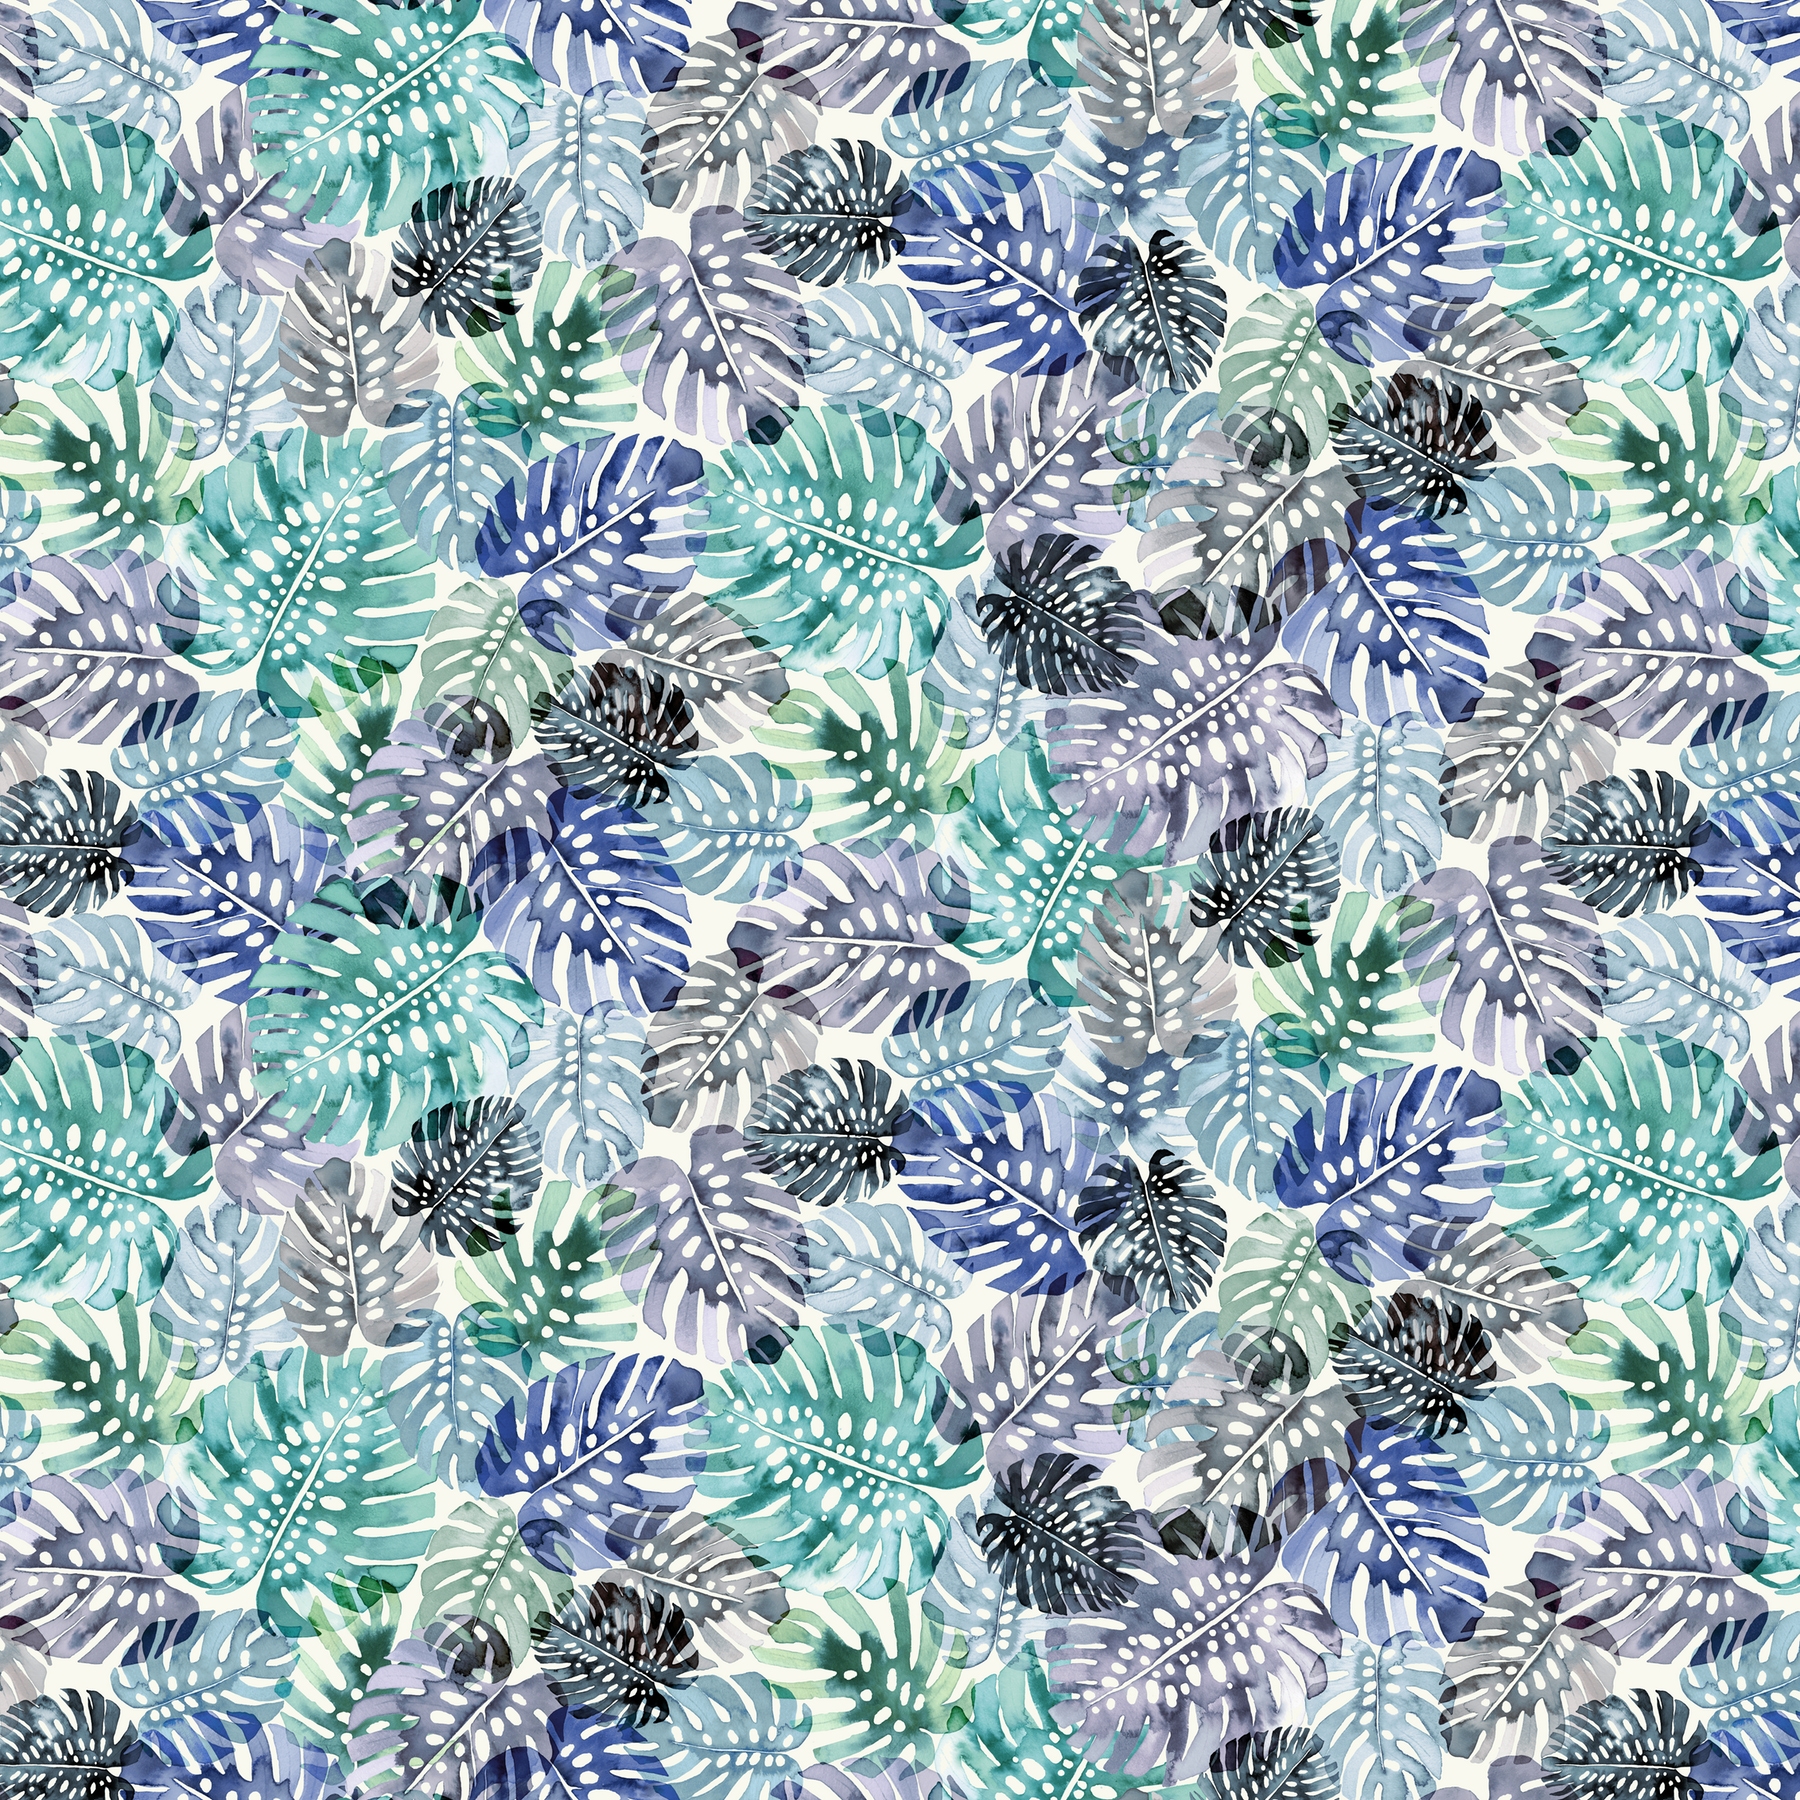 Buy Monstera Tropical Leaves Blue wallpaper - Free shipping